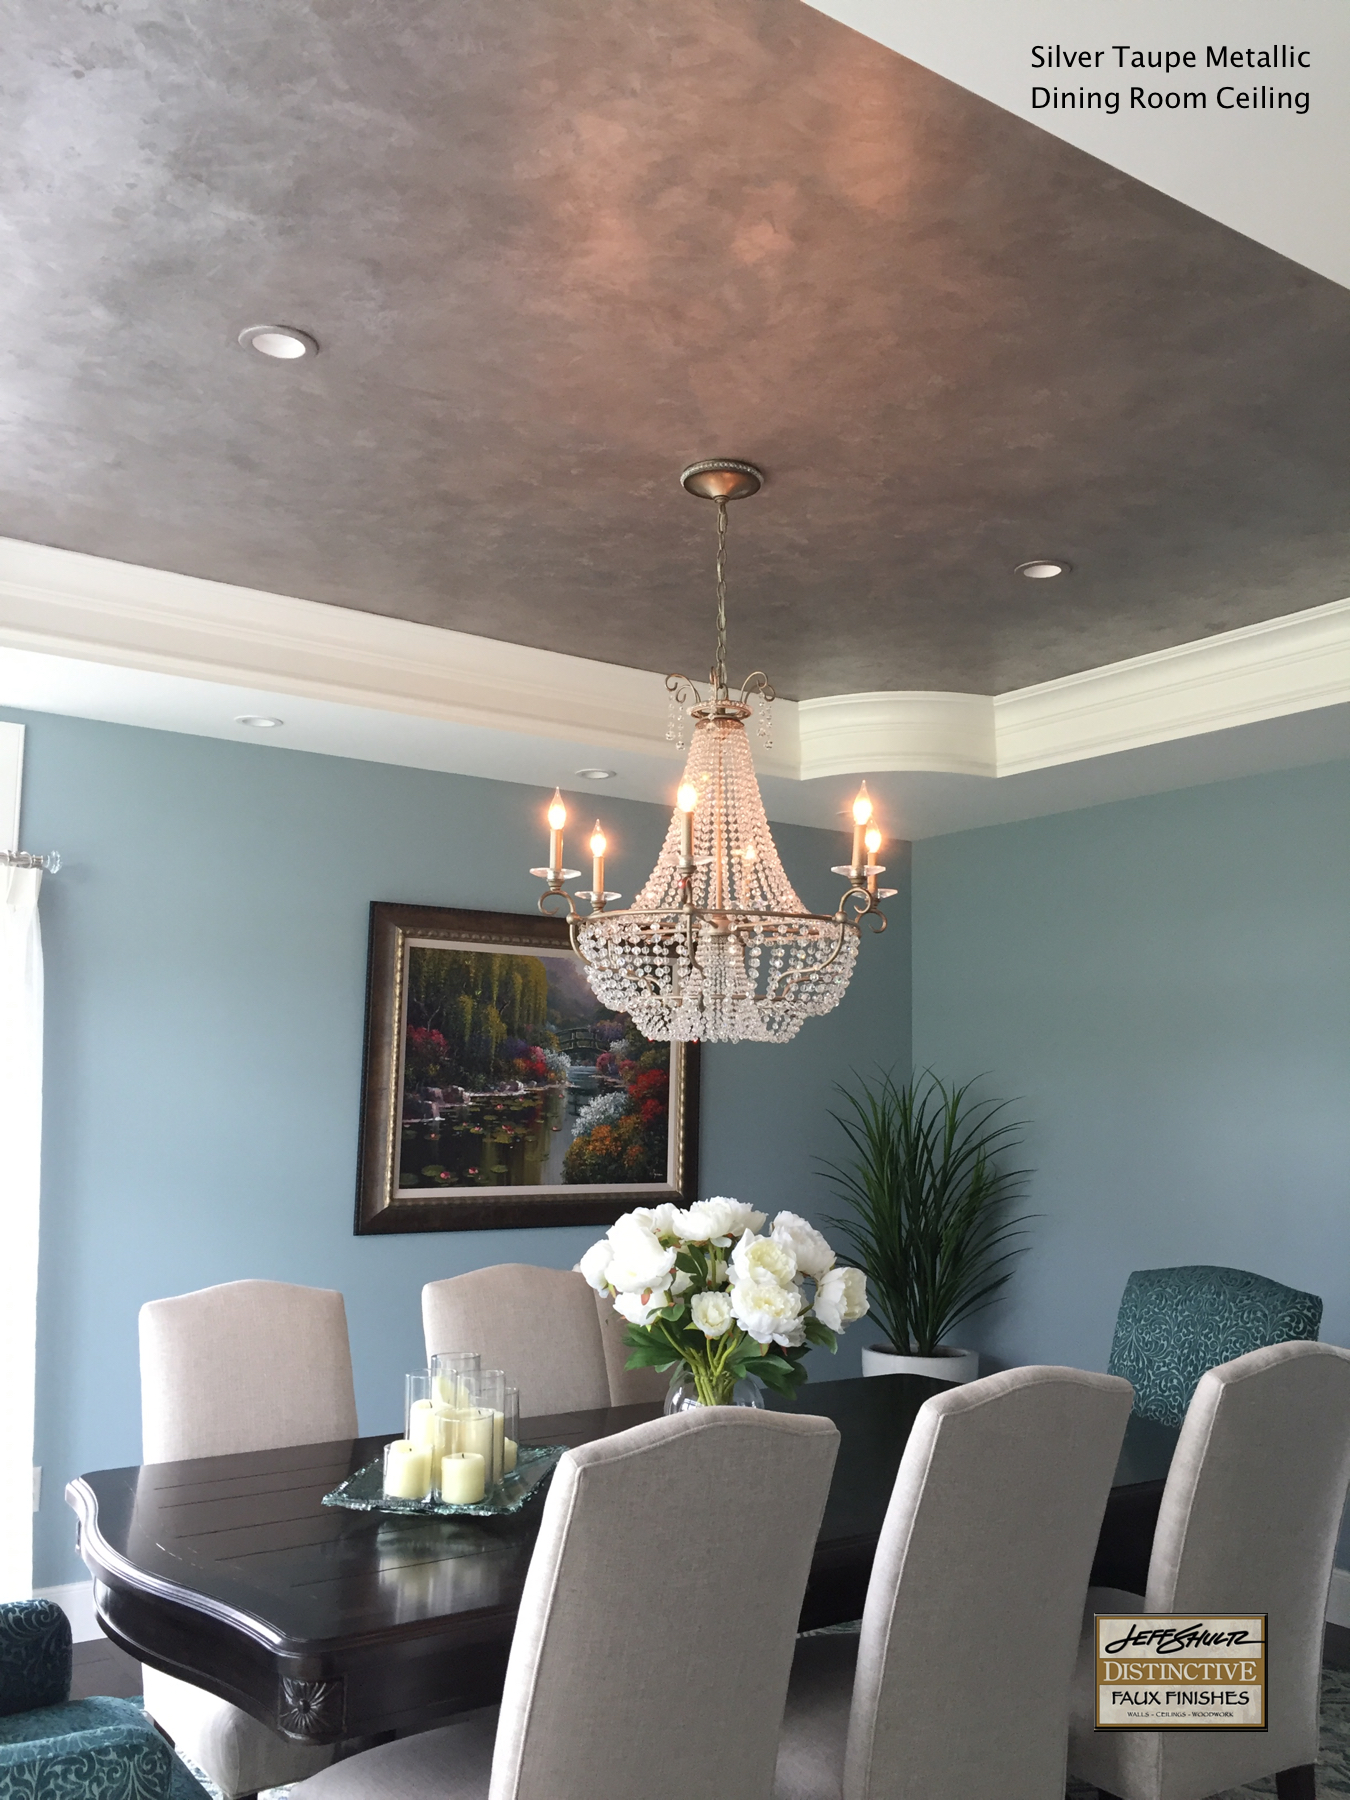 Smucker Silver Taupe Metallic Ceiling copy.jpg